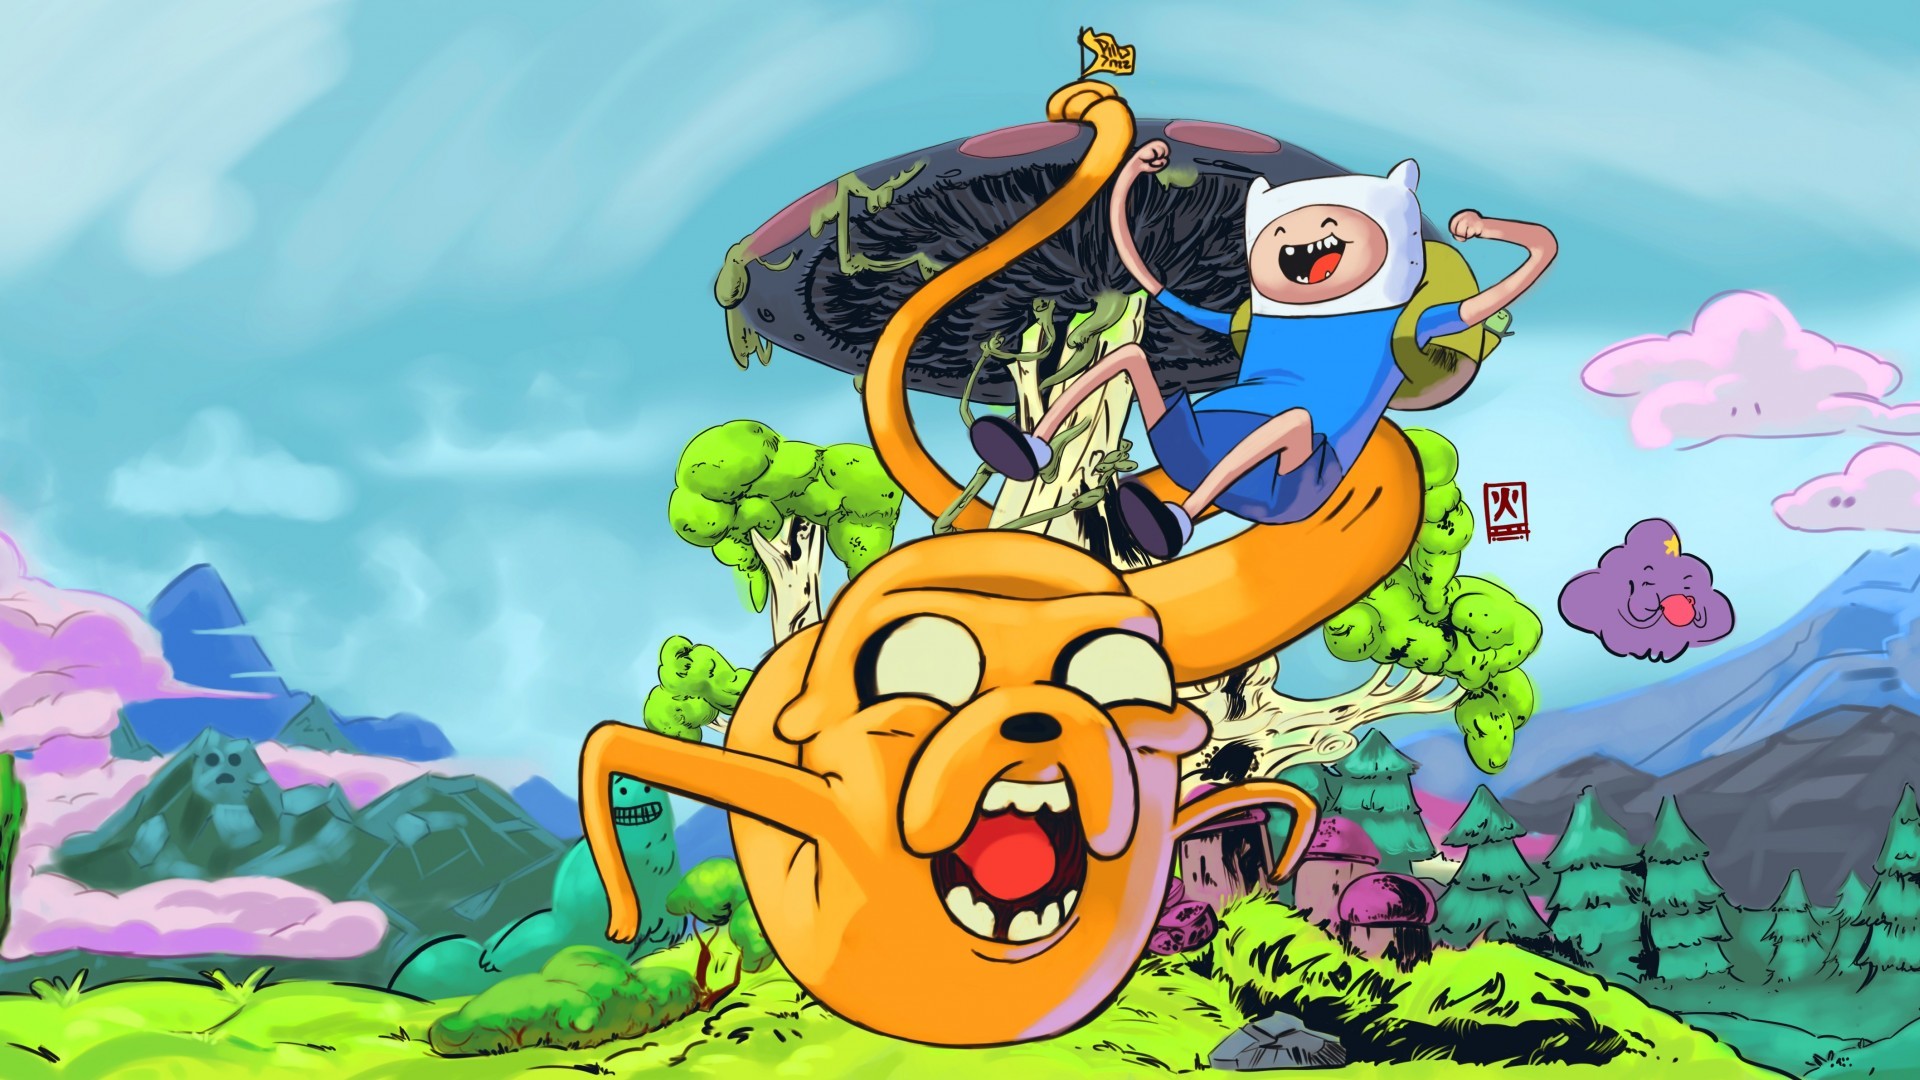 Adventure Time Wallpapers HD Wallpaper 19201080 Adventure Time Wallpaper 33 Wallpapers